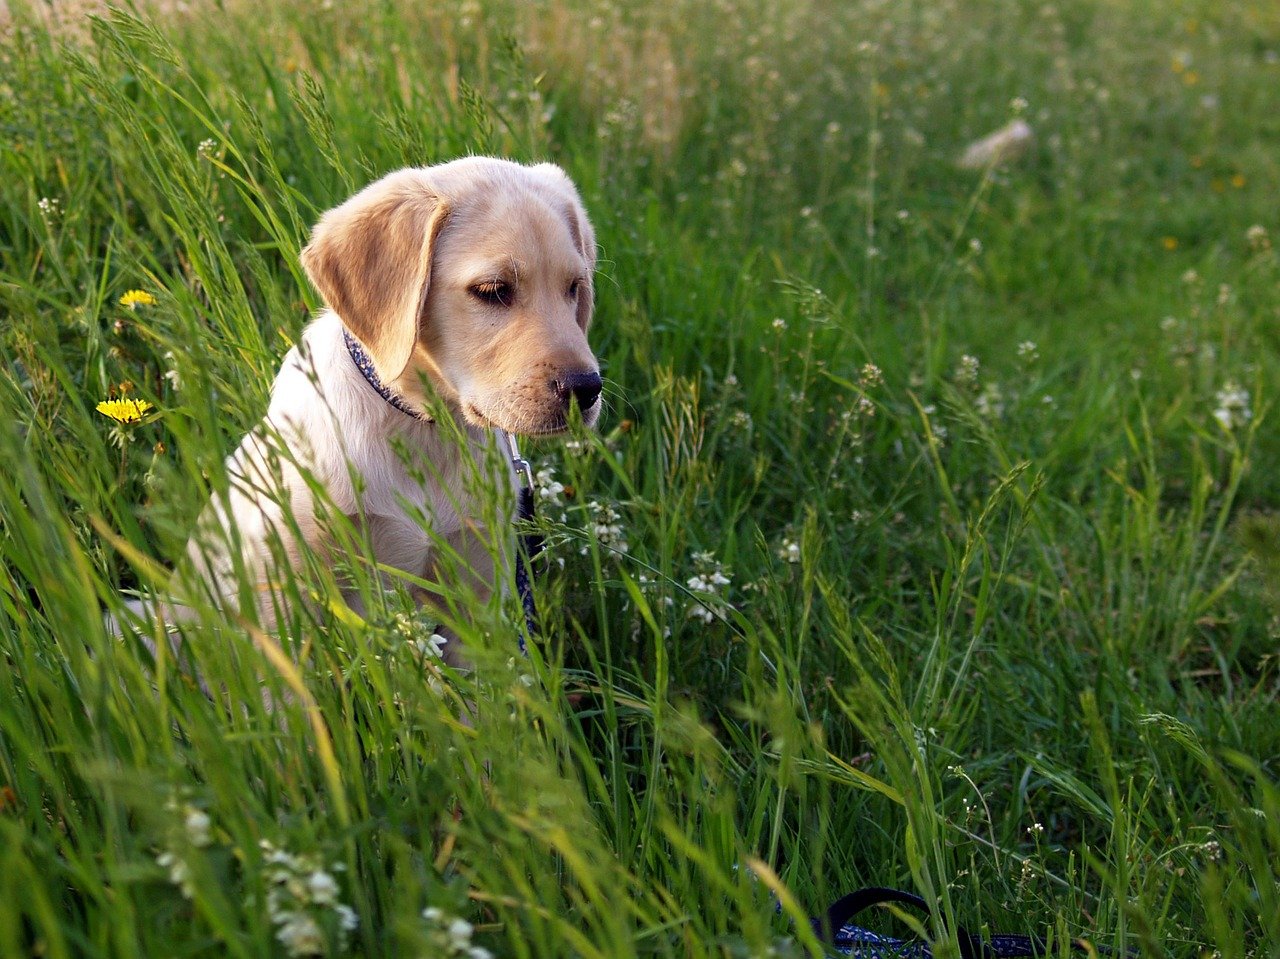 A yellow Lab puppy sitting down in very tall grass.